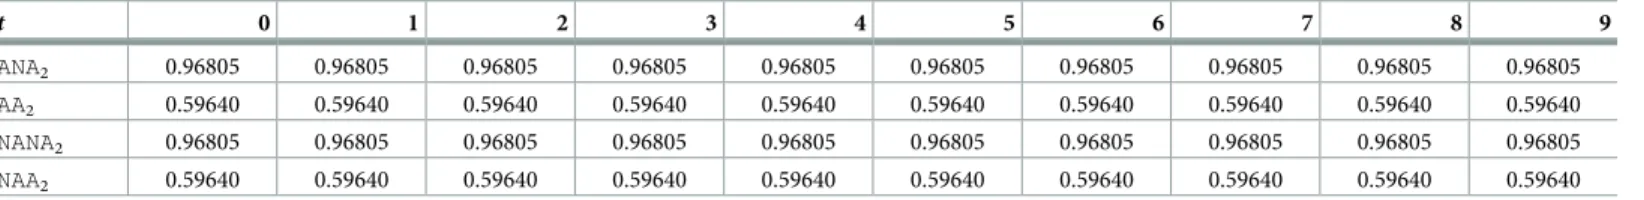 Table 3. QALY gained in the base case in each cycle of Markov simulation, for each health state of the SCIT strategy.